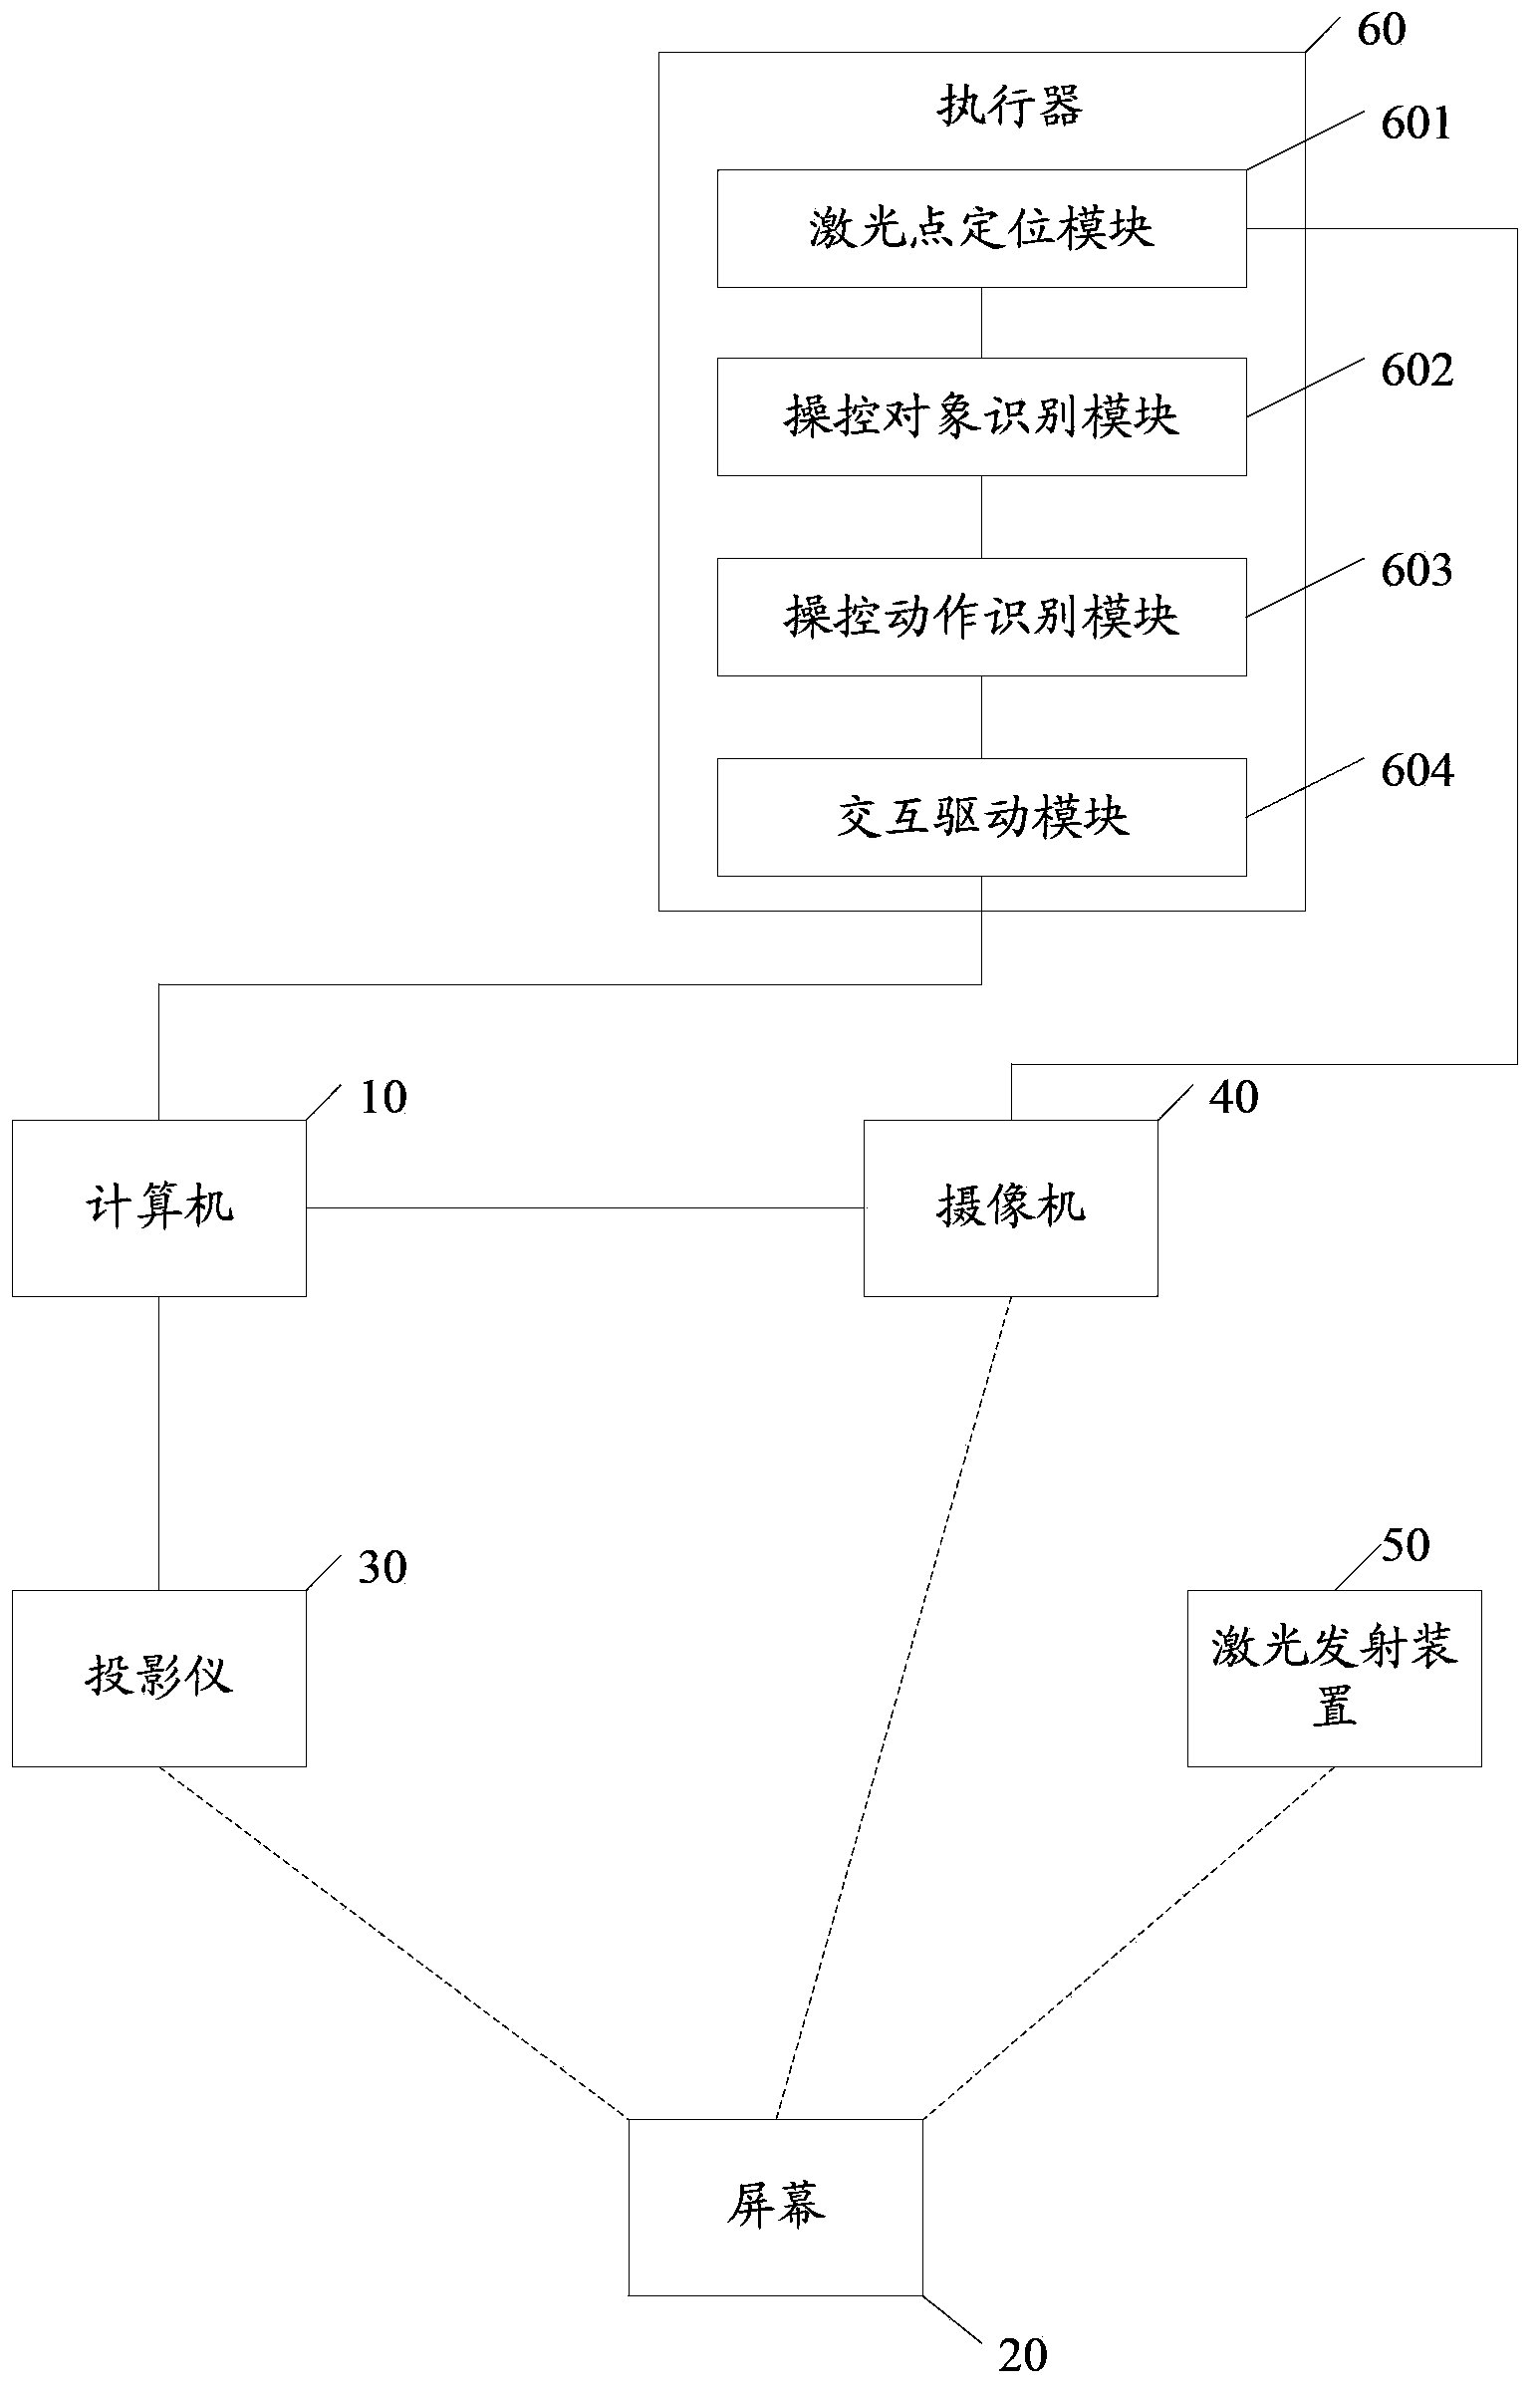 Non-contact screen interaction method and system